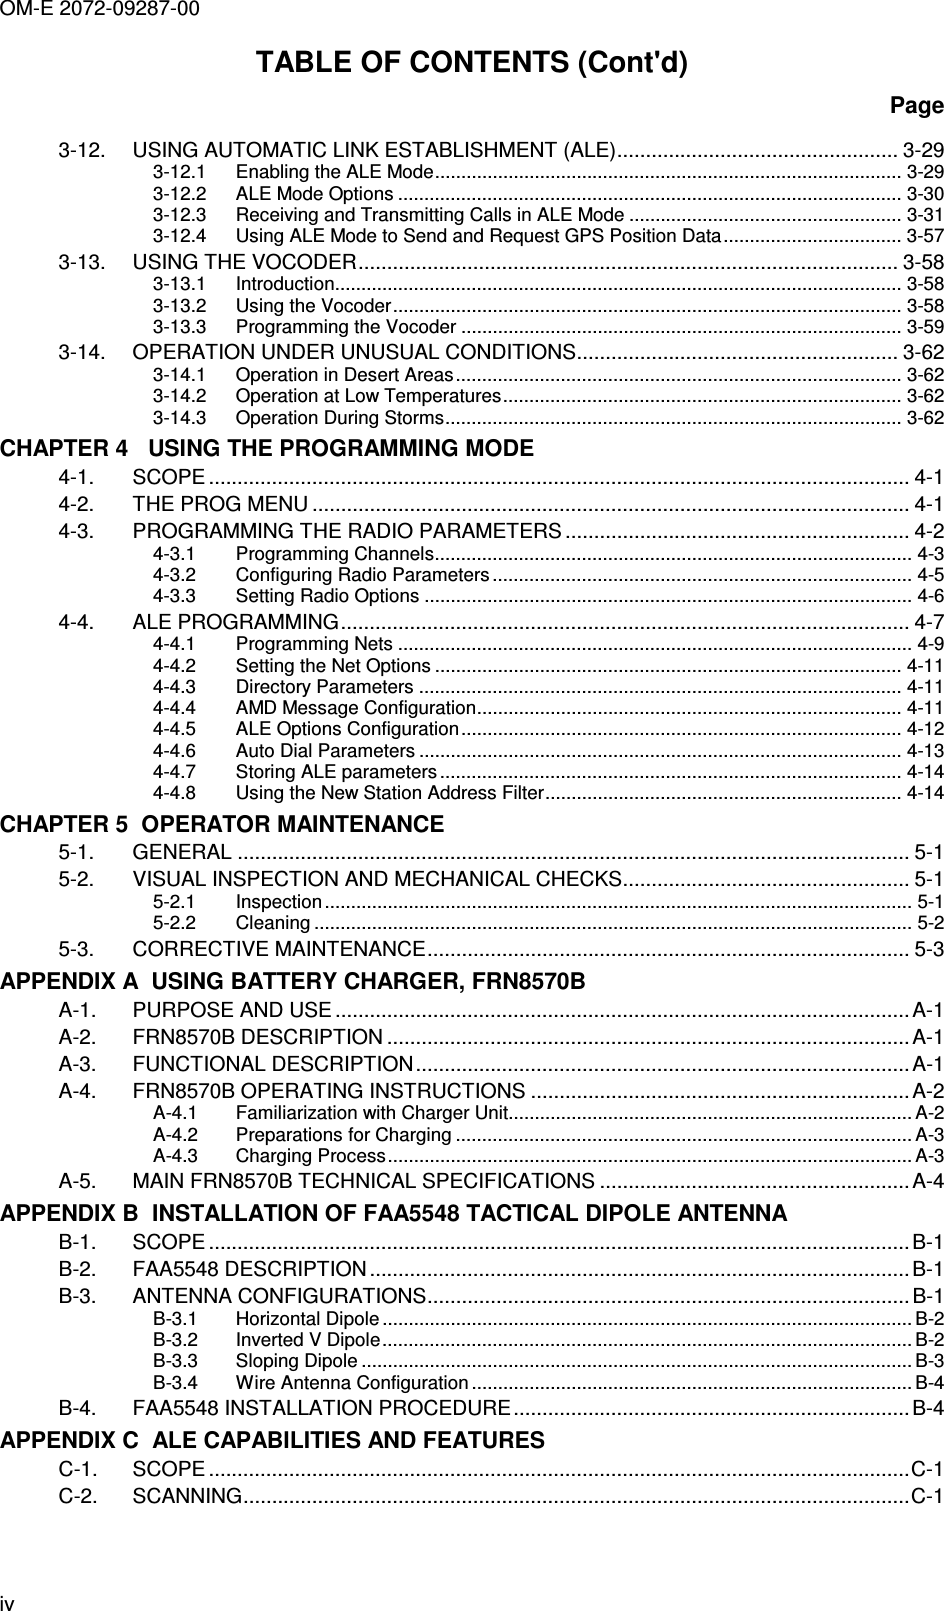 OM-E 2072-09287-00 iv TABLE OF CONTENTS (Cont&apos;d) Page 3-12. USING AUTOMATIC LINK ESTABLISHMENT (ALE)................................................. 3-29 3-12.1 Enabling the ALE Mode......................................................................................... 3-29 3-12.2 ALE Mode Options ................................................................................................ 3-30 3-12.3 Receiving and Transmitting Calls in ALE Mode .................................................... 3-31 3-12.4 Using ALE Mode to Send and Request GPS Position Data.................................. 3-57 3-13. USING THE VOCODER.............................................................................................. 3-58 3-13.1 Introduction............................................................................................................ 3-58 3-13.2 Using the Vocoder................................................................................................. 3-58 3-13.3 Programming the Vocoder .................................................................................... 3-59 3-14. OPERATION UNDER UNUSUAL CONDITIONS........................................................ 3-62 3-14.1 Operation in Desert Areas..................................................................................... 3-62 3-14.2 Operation at Low Temperatures............................................................................ 3-62 3-14.3 Operation During Storms....................................................................................... 3-62 CHAPTER 4   USING THE PROGRAMMING MODE 4-1. SCOPE .......................................................................................................................... 4-1 4-2. THE PROG MENU ........................................................................................................ 4-1 4-3. PROGRAMMING THE RADIO PARAMETERS ............................................................ 4-2 4-3.1 Programming Channels........................................................................................... 4-3 4-3.2 Configuring Radio Parameters ................................................................................ 4-5 4-3.3 Setting Radio Options ............................................................................................. 4-6 4-4. ALE PROGRAMMING................................................................................................... 4-7 4-4.1 Programming Nets .................................................................................................. 4-9 4-4.2 Setting the Net Options ......................................................................................... 4-11 4-4.3 Directory Parameters ............................................................................................ 4-11 4-4.4 AMD Message Configuration................................................................................. 4-11 4-4.5 ALE Options Configuration.................................................................................... 4-12 4-4.6 Auto Dial Parameters ............................................................................................ 4-13 4-4.7 Storing ALE parameters ........................................................................................ 4-14 4-4.8 Using the New Station Address Filter.................................................................... 4-14 CHAPTER 5  OPERATOR MAINTENANCE 5-1. GENERAL ..................................................................................................................... 5-1 5-2. VISUAL INSPECTION AND MECHANICAL CHECKS.................................................. 5-1 5-2.1 Inspection ................................................................................................................ 5-1 5-2.2 Cleaning .................................................................................................................. 5-2 5-3. CORRECTIVE MAINTENANCE.................................................................................... 5-3 APPENDIX A  USING BATTERY CHARGER, FRN8570B A-1. PURPOSE AND USE ....................................................................................................A-1 A-2. FRN8570B DESCRIPTION ...........................................................................................A-1 A-3. FUNCTIONAL DESCRIPTION......................................................................................A-1 A-4. FRN8570B OPERATING INSTRUCTIONS ..................................................................A-2 A-4.1 Familiarization with Charger Unit............................................................................. A-2 A-4.2 Preparations for Charging ....................................................................................... A-3 A-4.3 Charging Process.................................................................................................... A-3 A-5. MAIN FRN8570B TECHNICAL SPECIFICATIONS ......................................................A-4 APPENDIX B  INSTALLATION OF FAA5548 TACTICAL DIPOLE ANTENNA B-1. SCOPE .......................................................................................................................... B-1 B-2. FAA5548 DESCRIPTION ..............................................................................................B-1 B-3. ANTENNA CONFIGURATIONS.................................................................................... B-1 B-3.1 Horizontal Dipole ..................................................................................................... B-2 B-3.2 Inverted V Dipole..................................................................................................... B-2 B-3.3 Sloping Dipole ......................................................................................................... B-3 B-3.4 Wire Antenna Configuration .................................................................................... B-4 B-4. FAA5548 INSTALLATION PROCEDURE.....................................................................B-4 APPENDIX C  ALE CAPABILITIES AND FEATURES C-1. SCOPE ..........................................................................................................................C-1 C-2. SCANNING....................................................................................................................C-1 